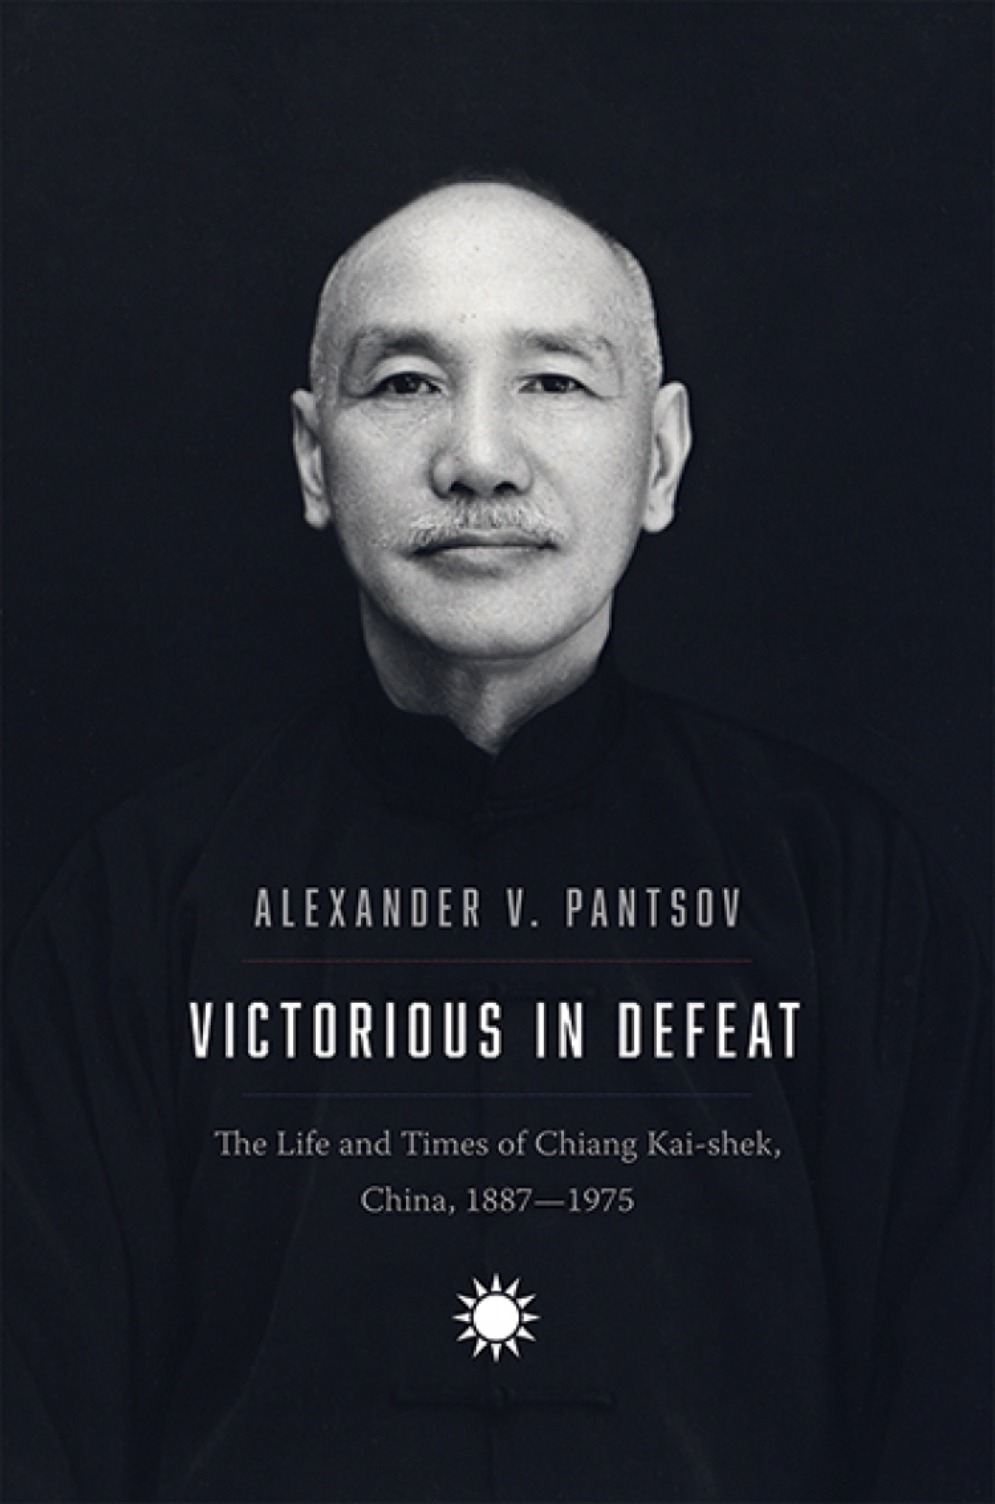 Victorious in Defeat by Alexander V. Pantsov and Steven I. Levine